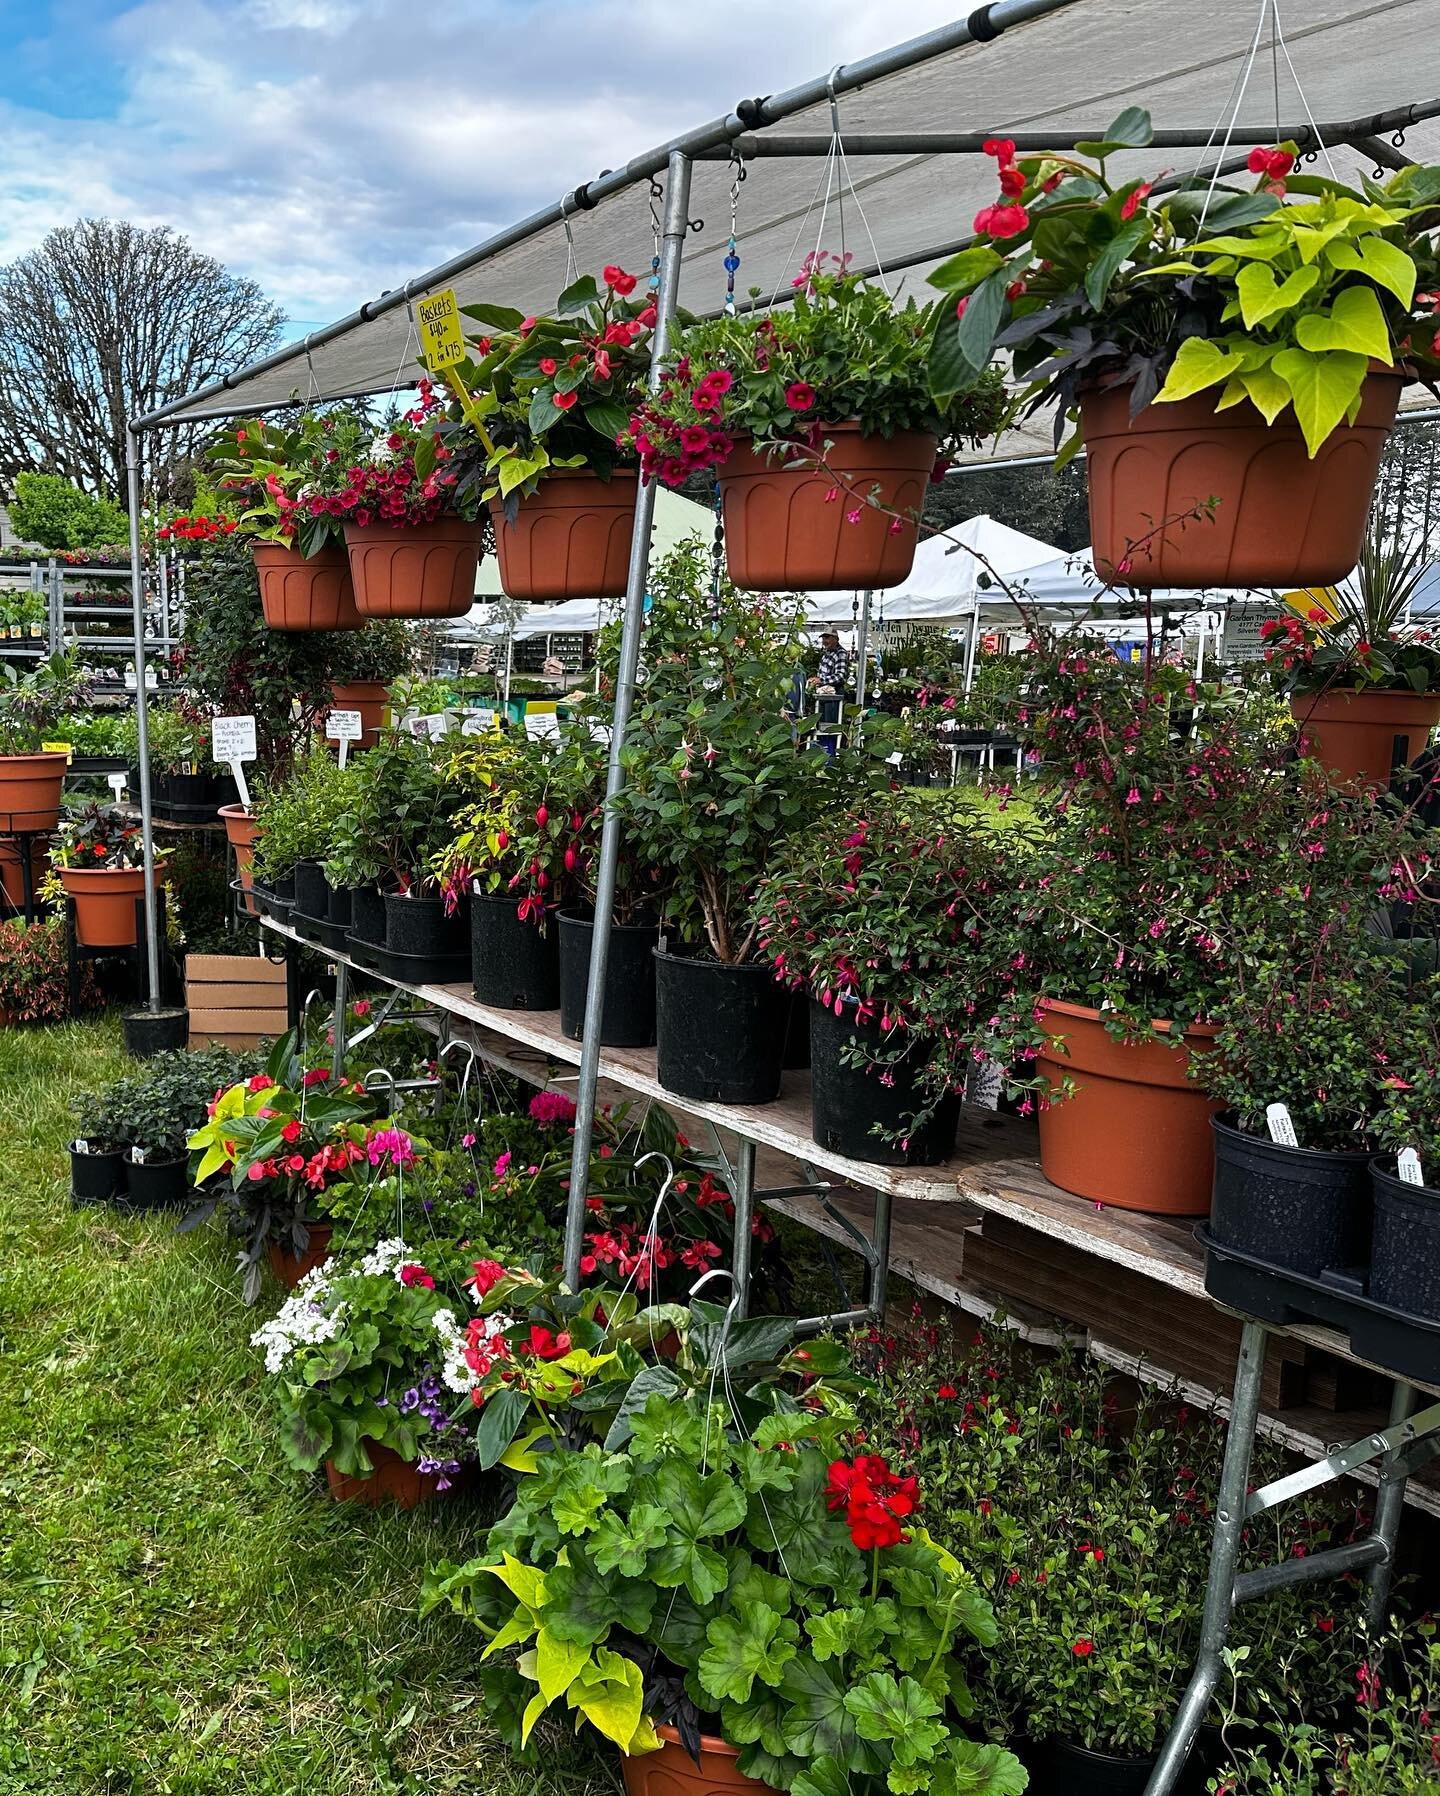 Spring has sprung and so has the Garden Fair! Join us this weekend for a blooming good time🌷🌻🌸
Find us @ the Clackamas County Fairgrounds today &amp; tomorrow. 
May 6: 9am - 5pm
May 7: 9am - 4pm
#nmherbnursery #GardenFair2023 #mastergardeners